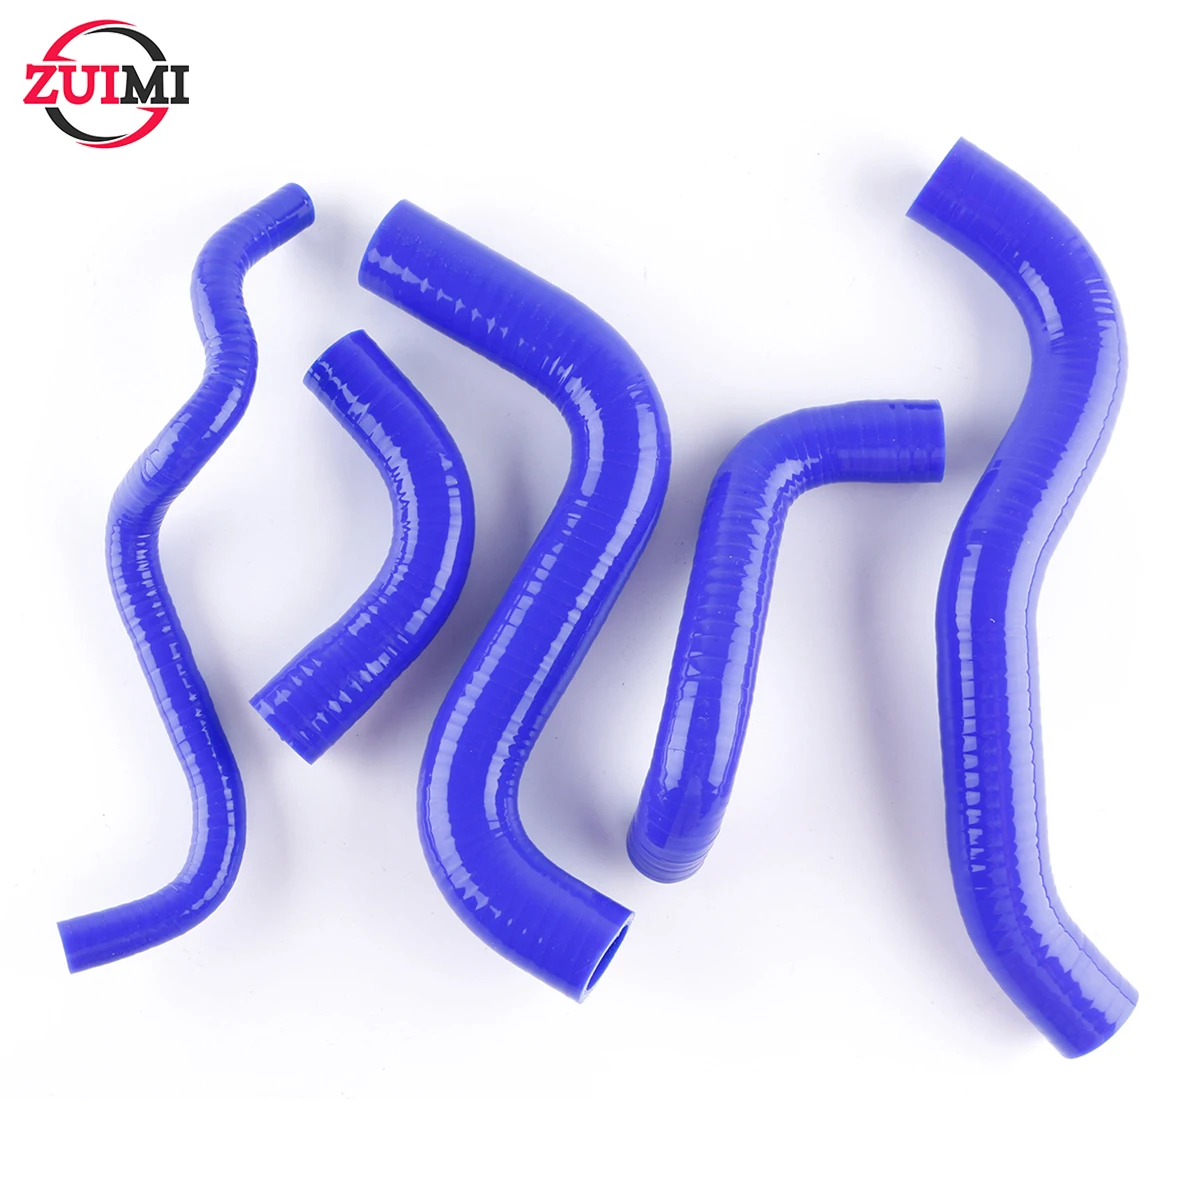 For Suzuki Bandit GSF 1250S GSF1250 S 2008 2009 Silicone Radiator Coolant Hose Kit